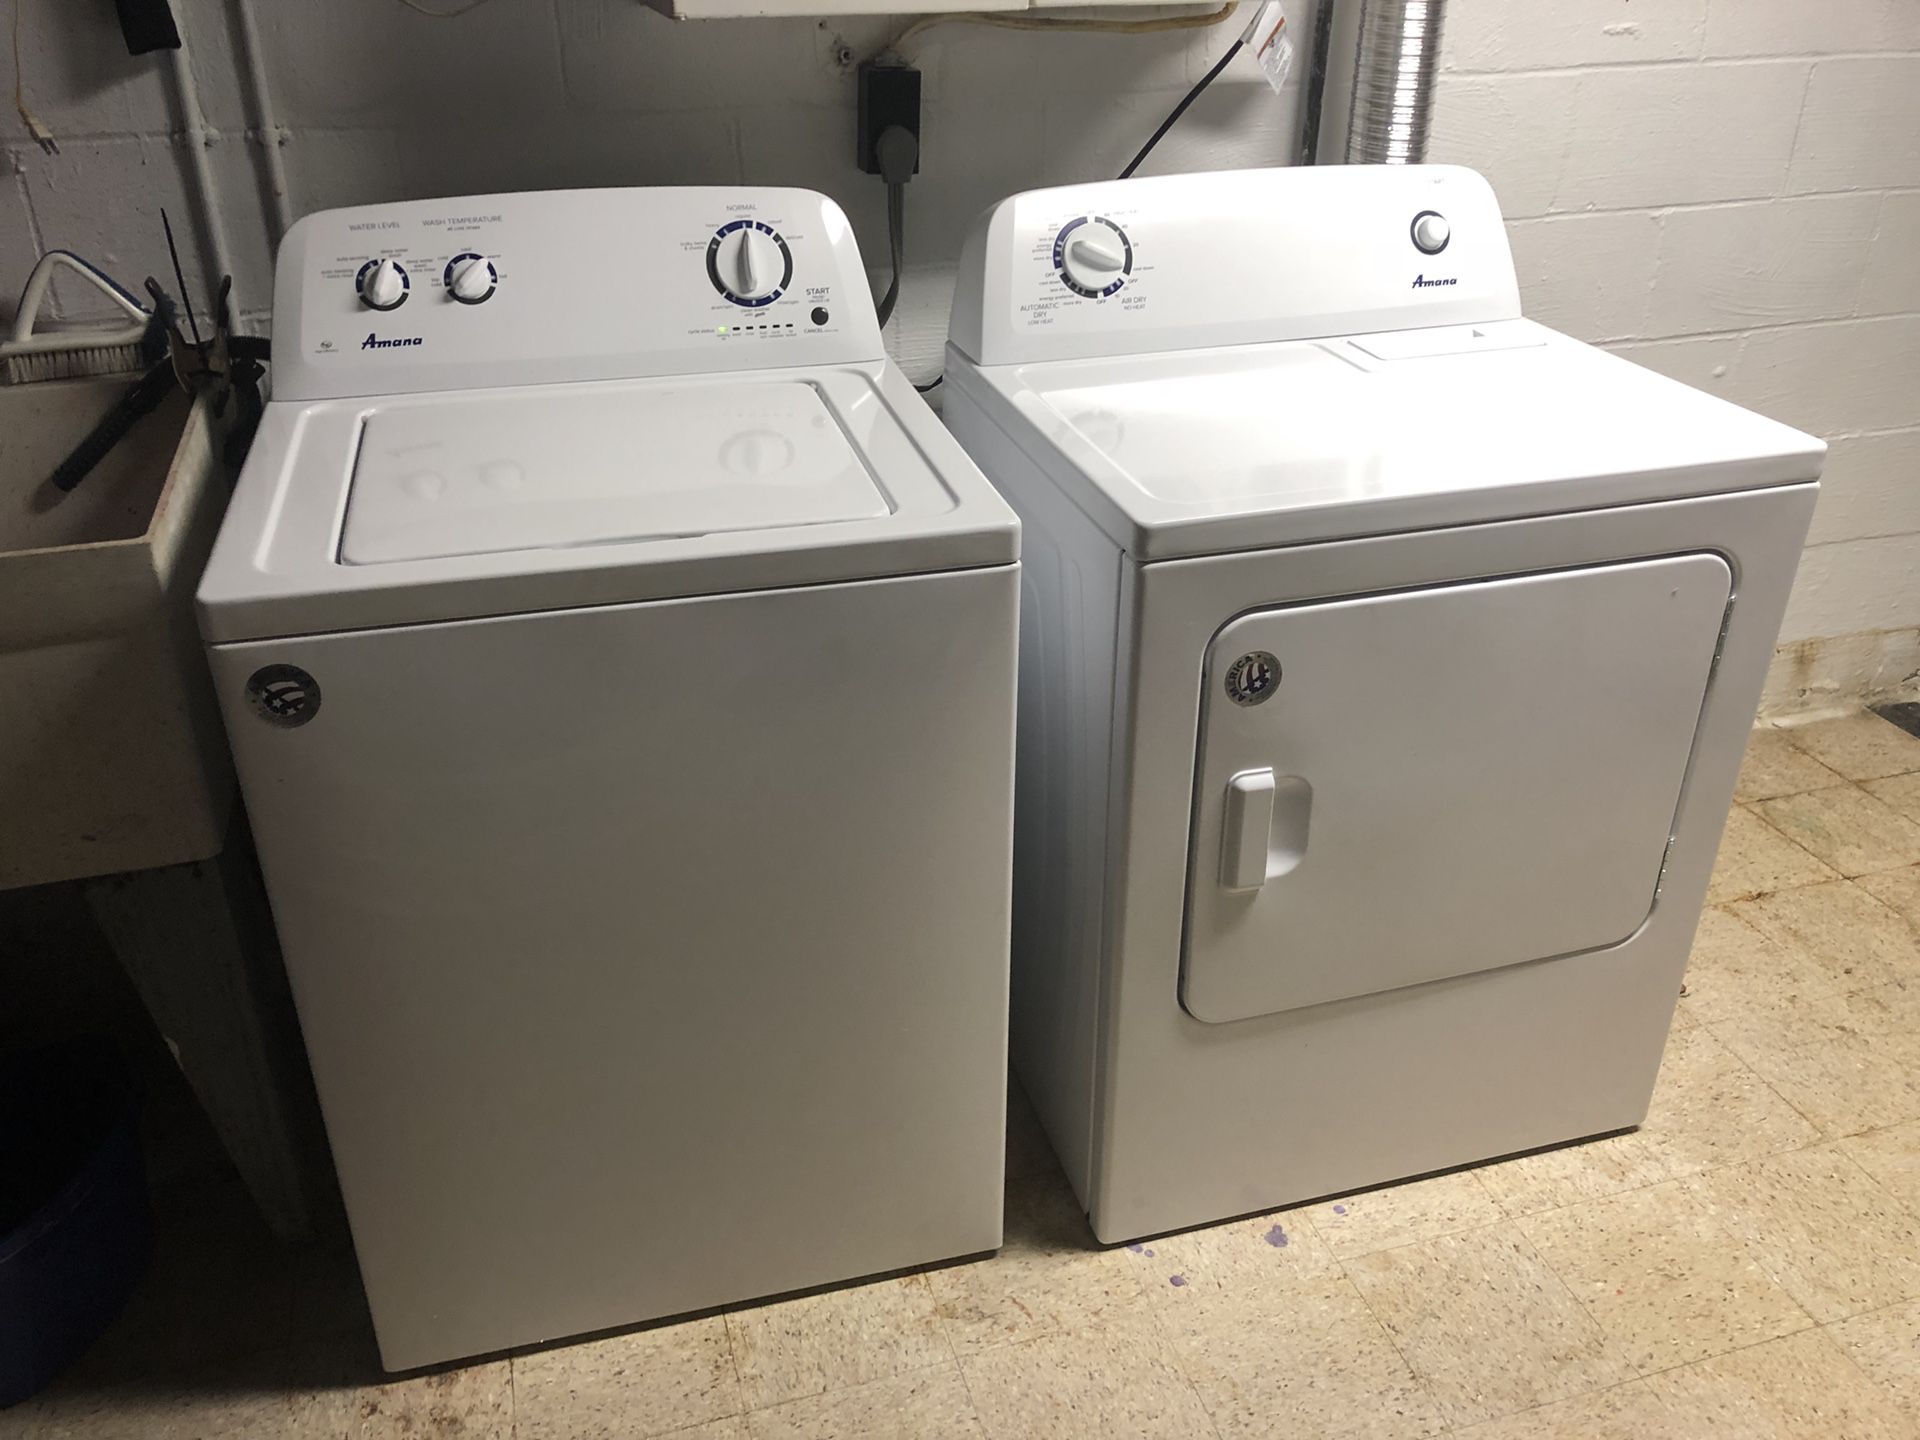 Amana washer and electric dryer